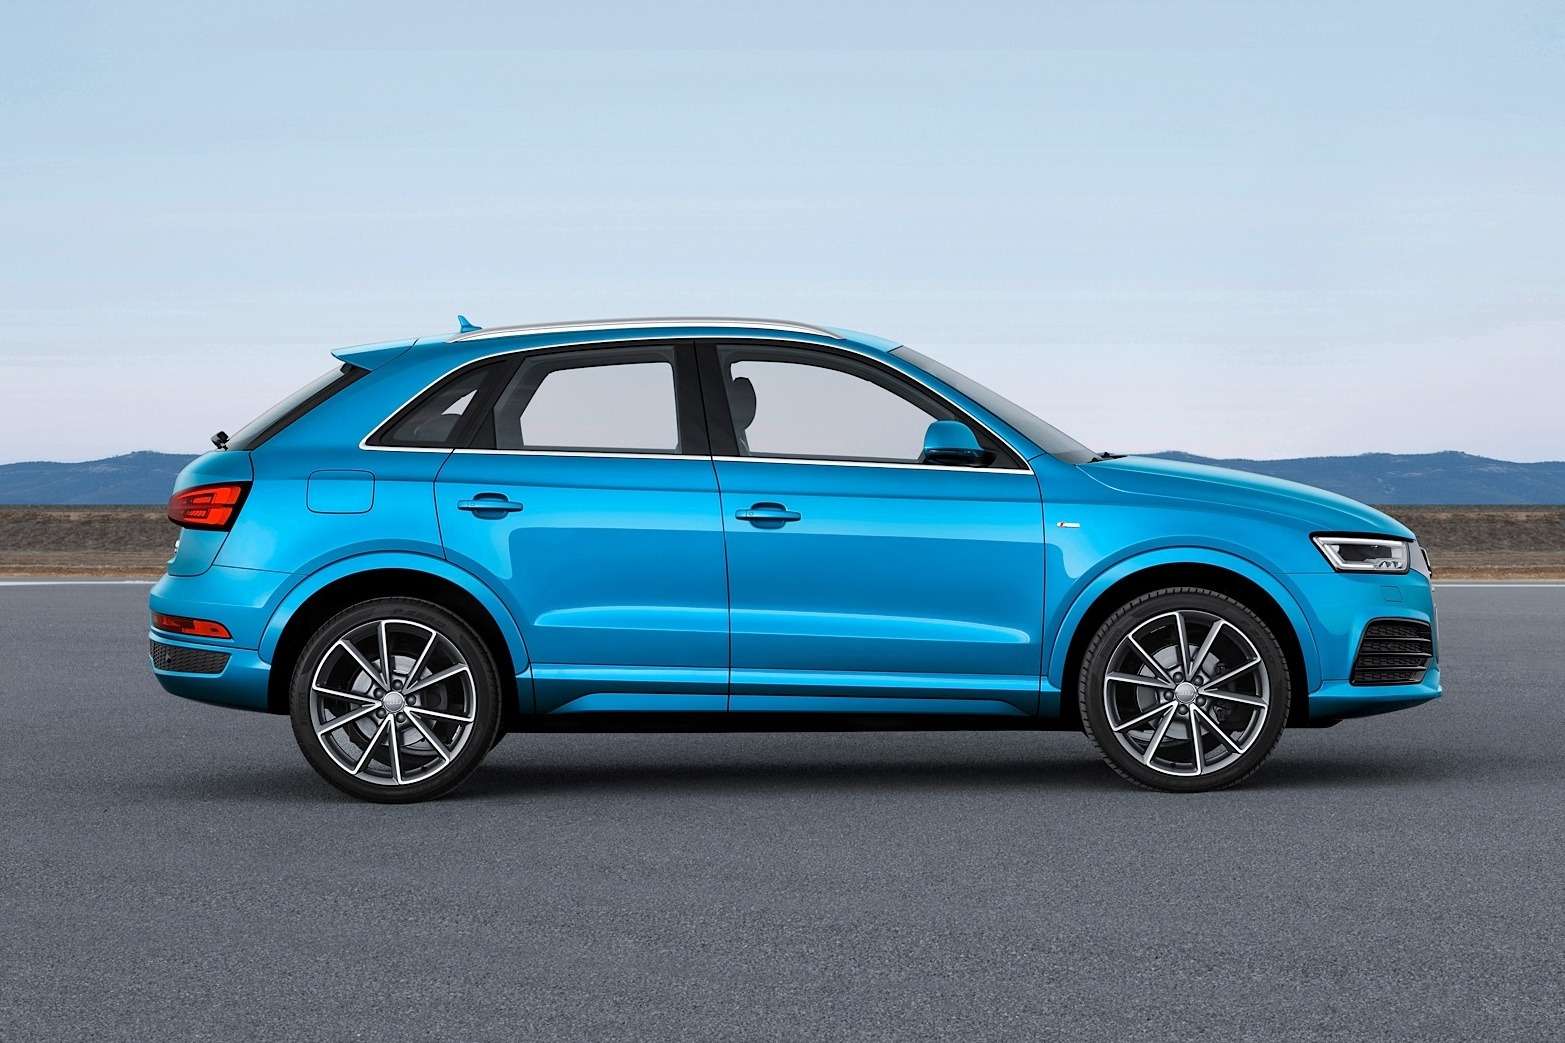 2015-audi-q3-facelift-revealed-with-fresh-looks-and-engines-video-photo-gallery_1